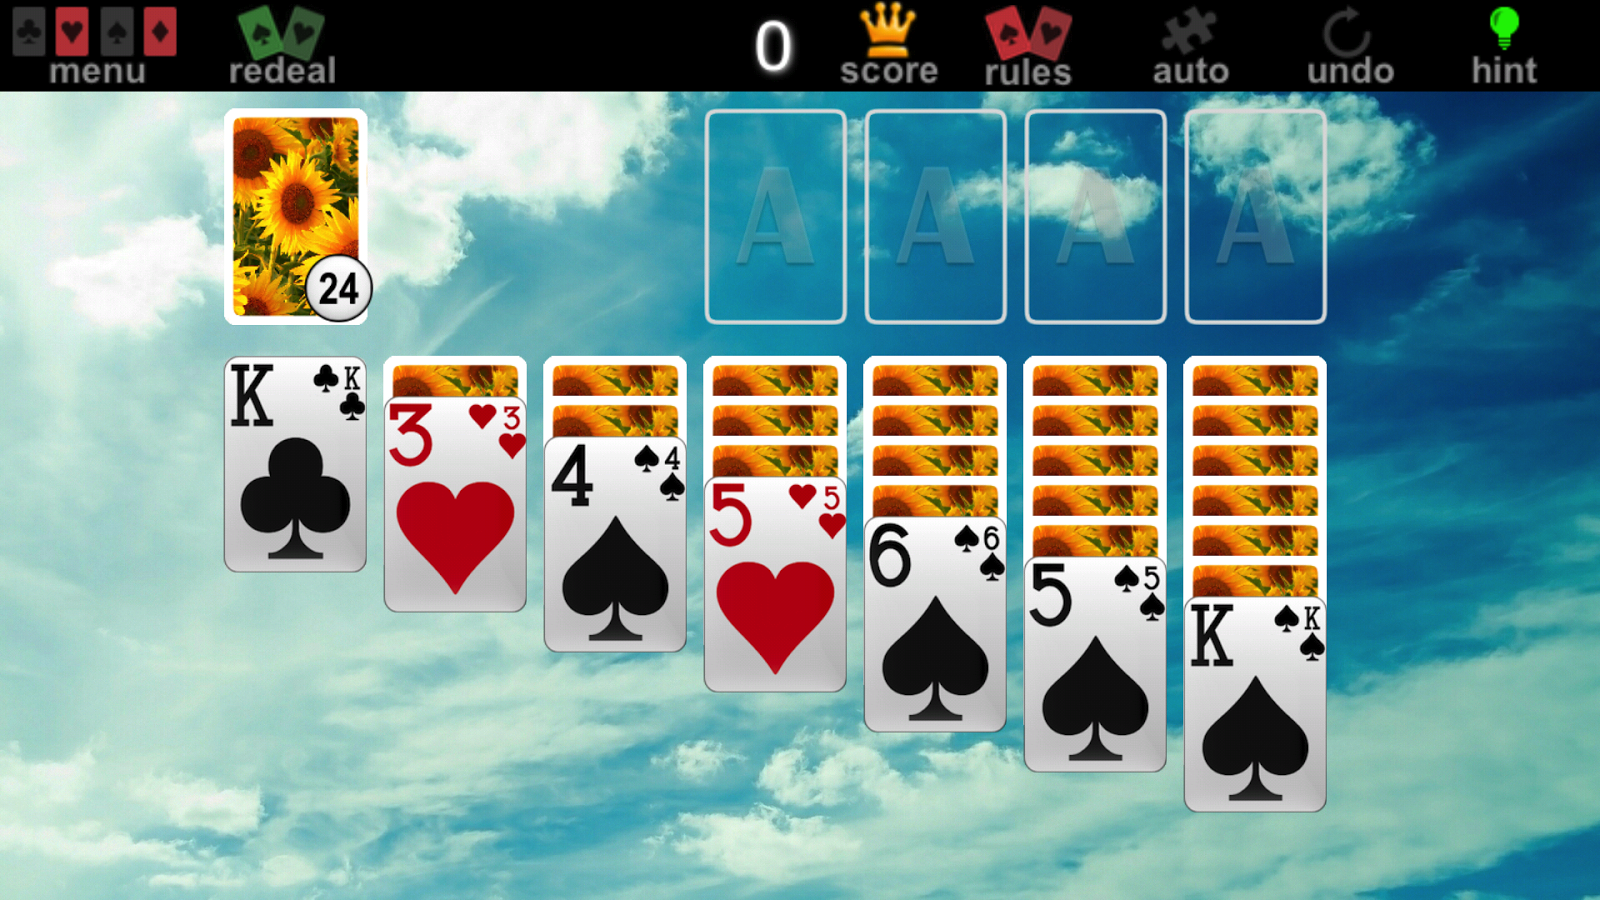 full deck solitaire game